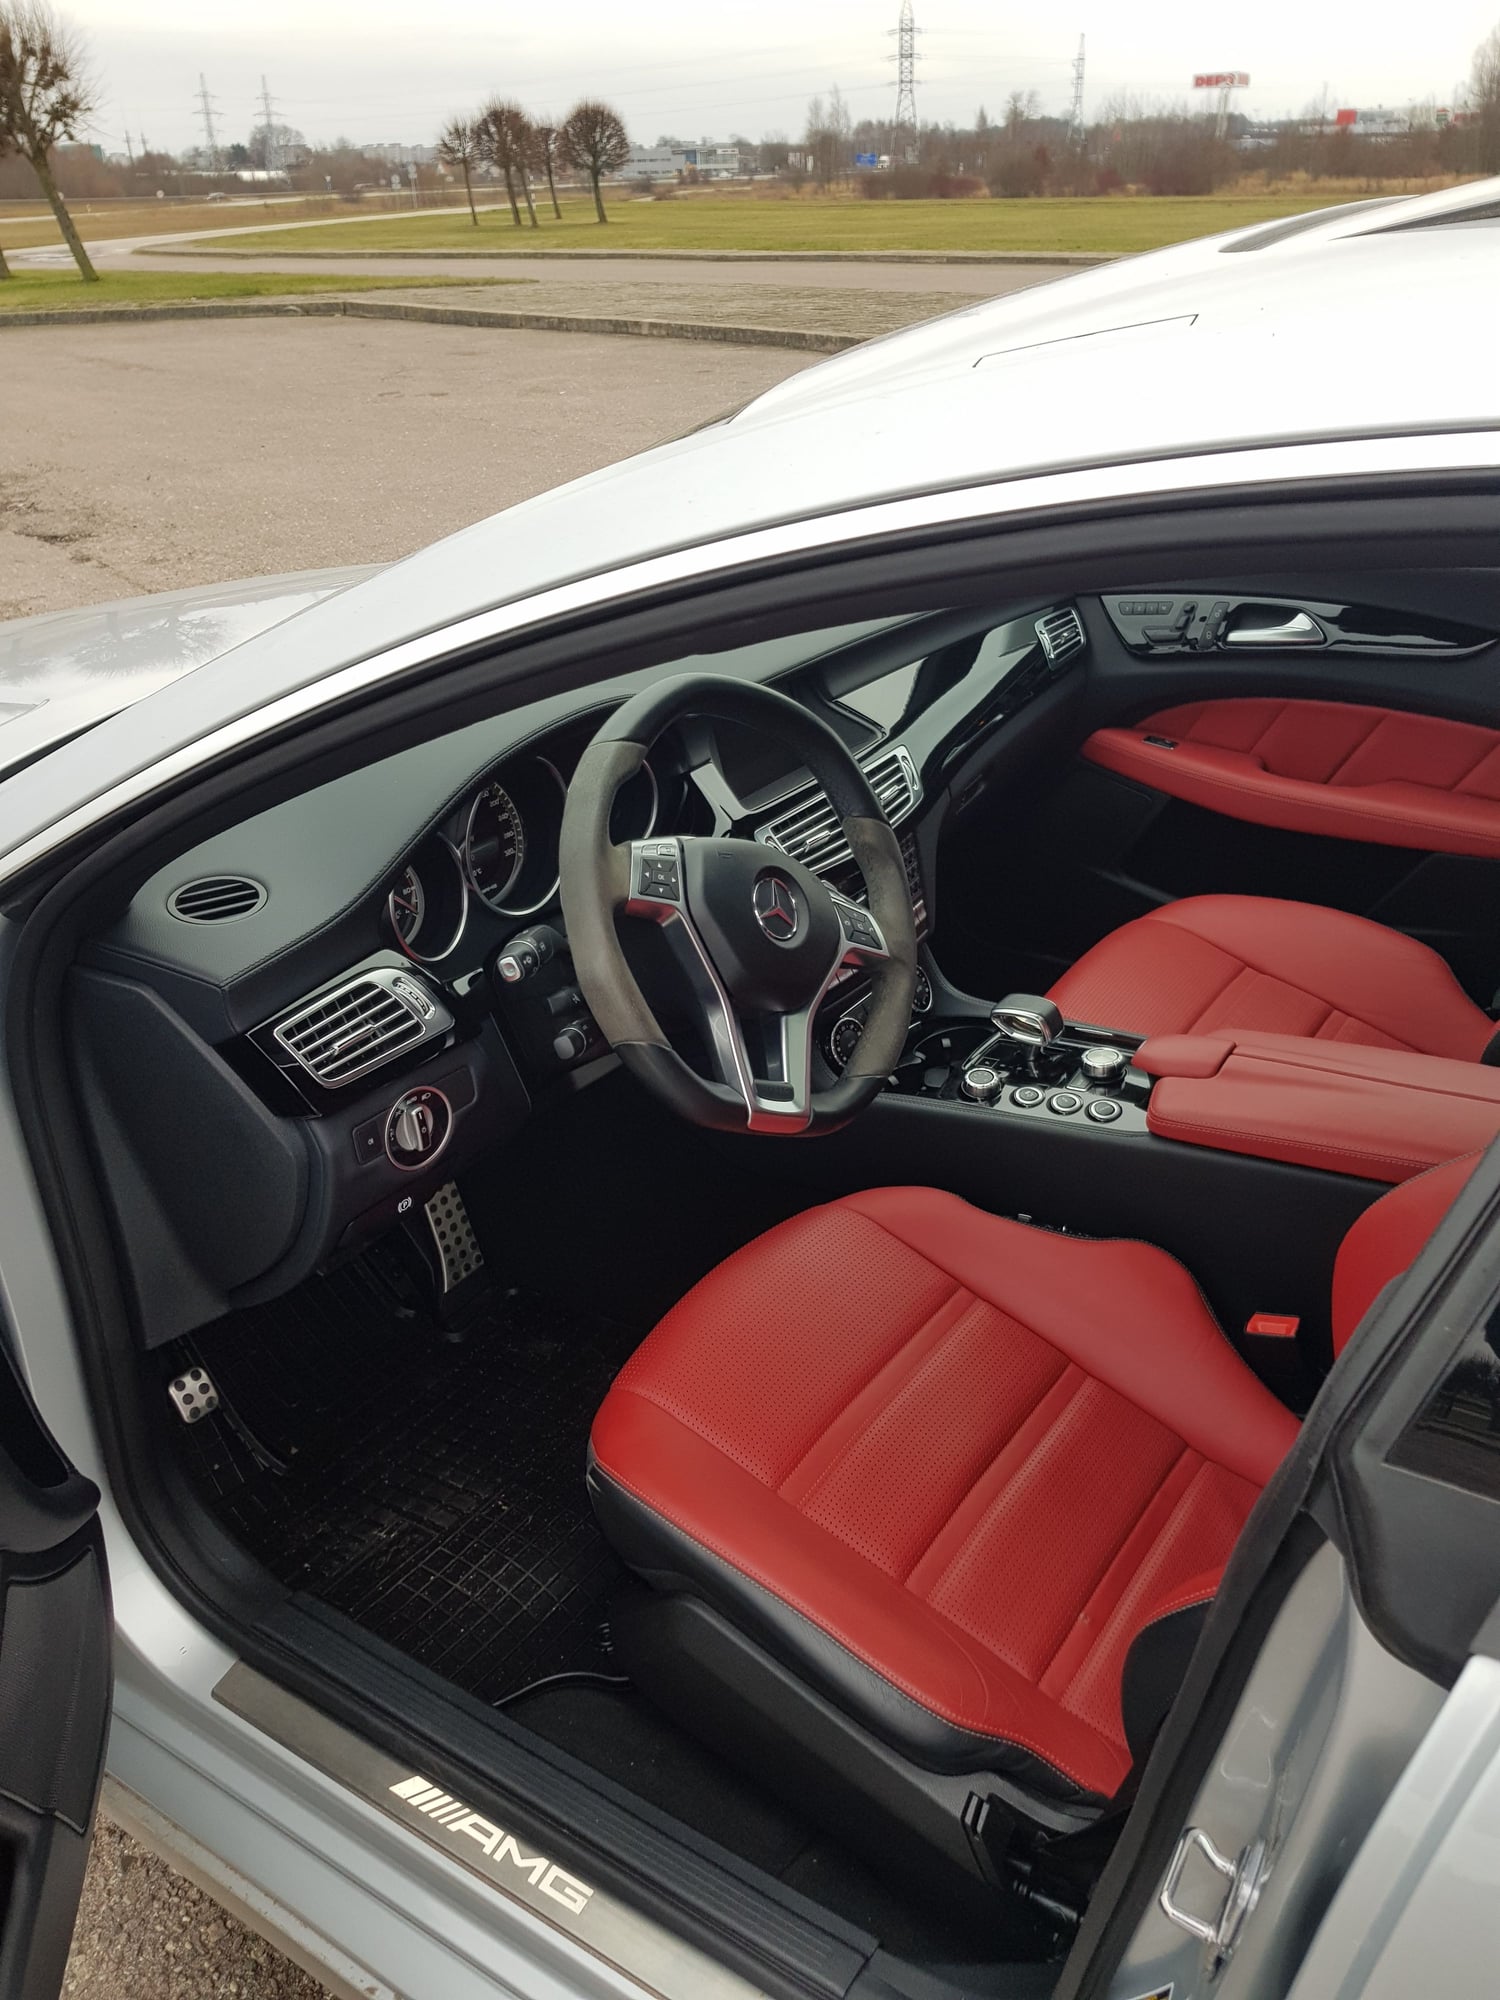 Mercedes benz CLS 63s low millage with red interior